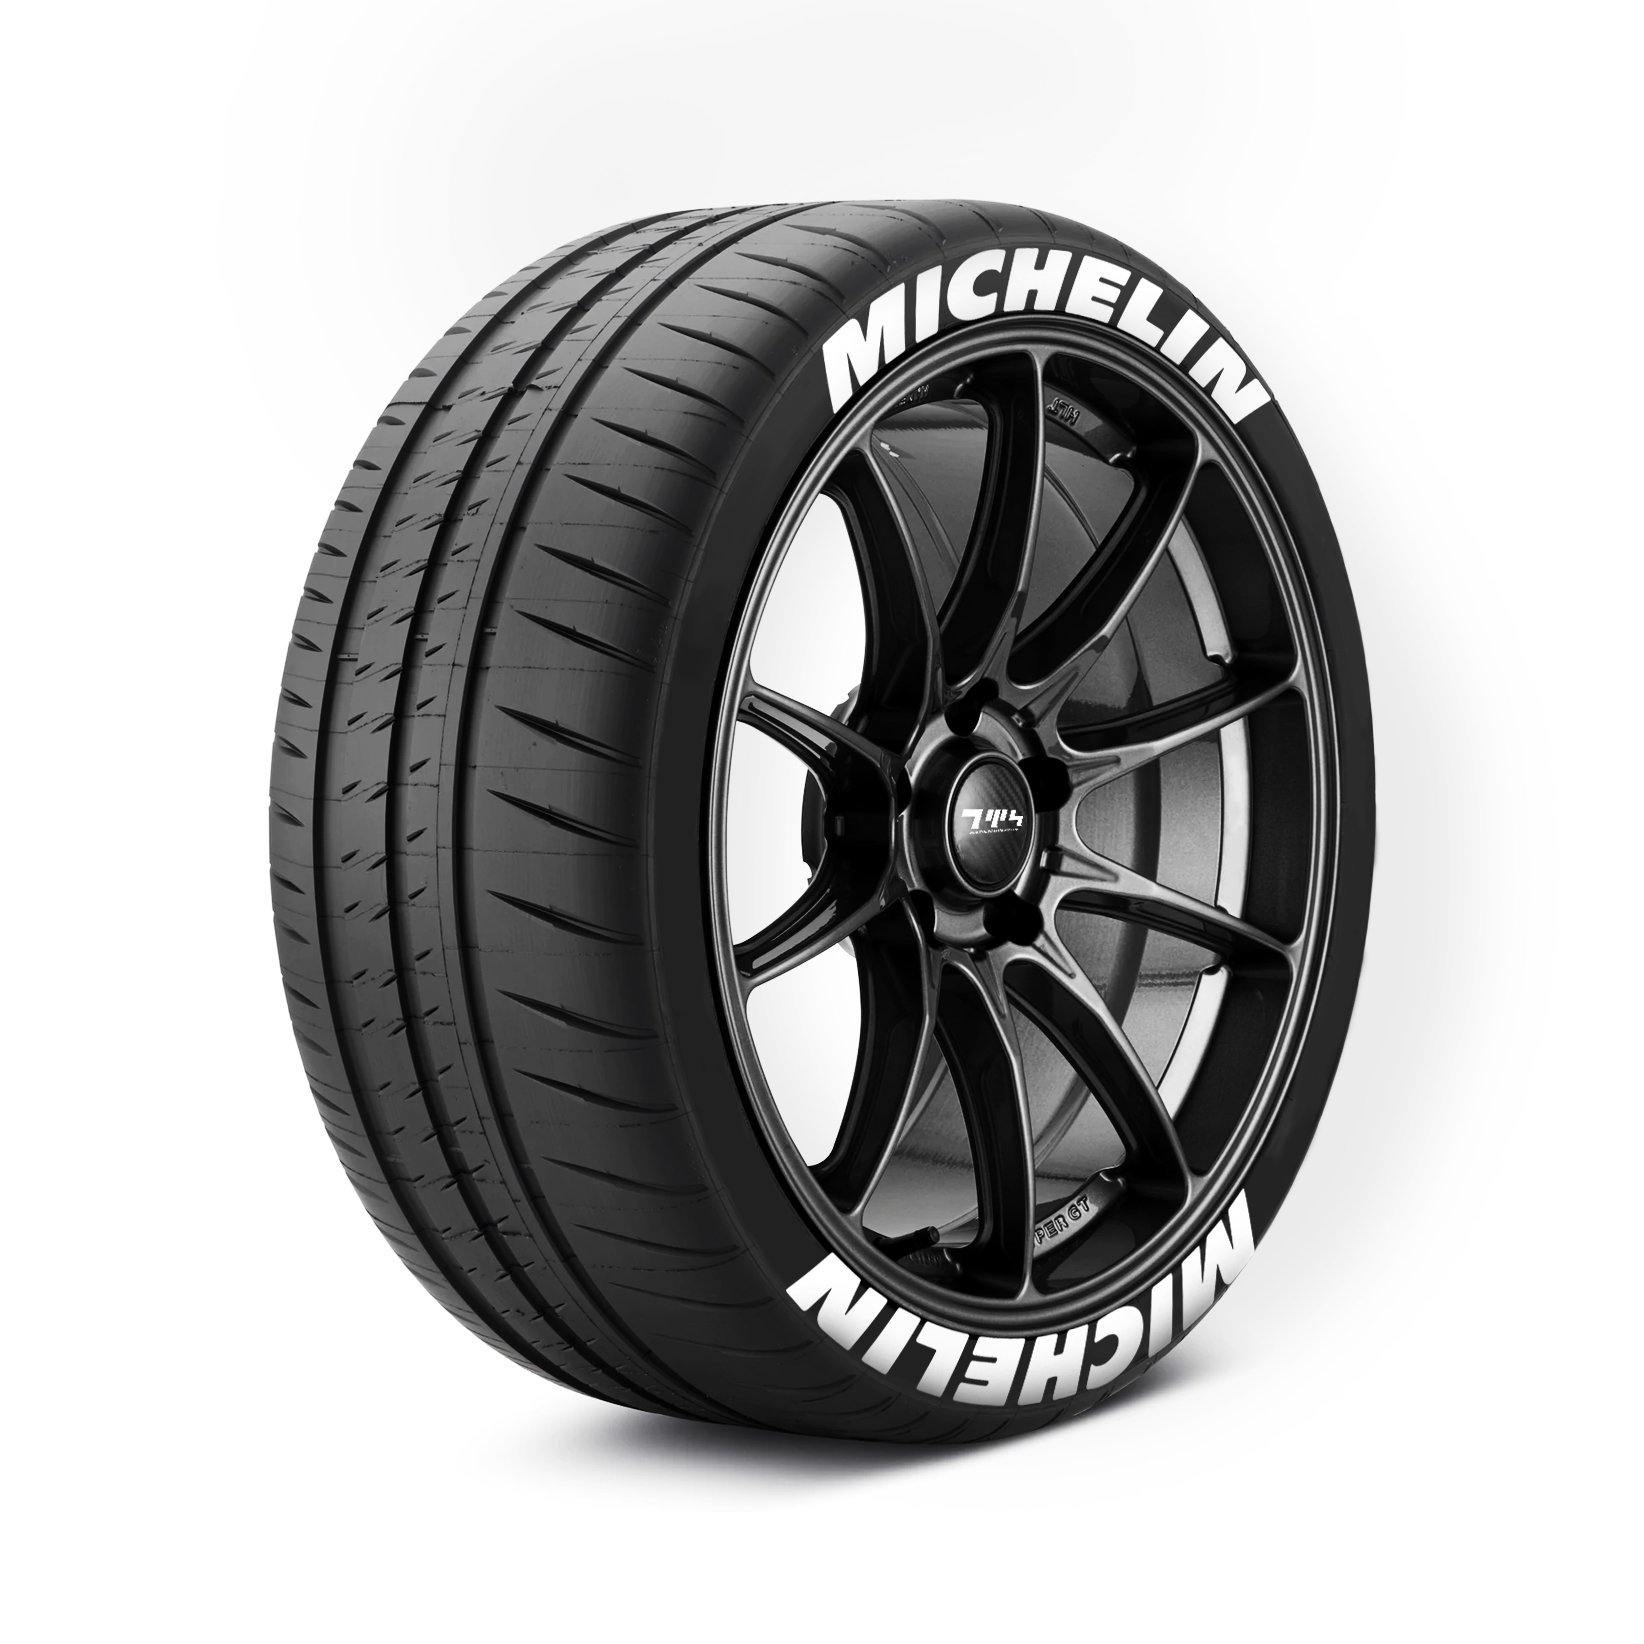 MICHELIN Tyre Stickers - Tyre Wall Stickers